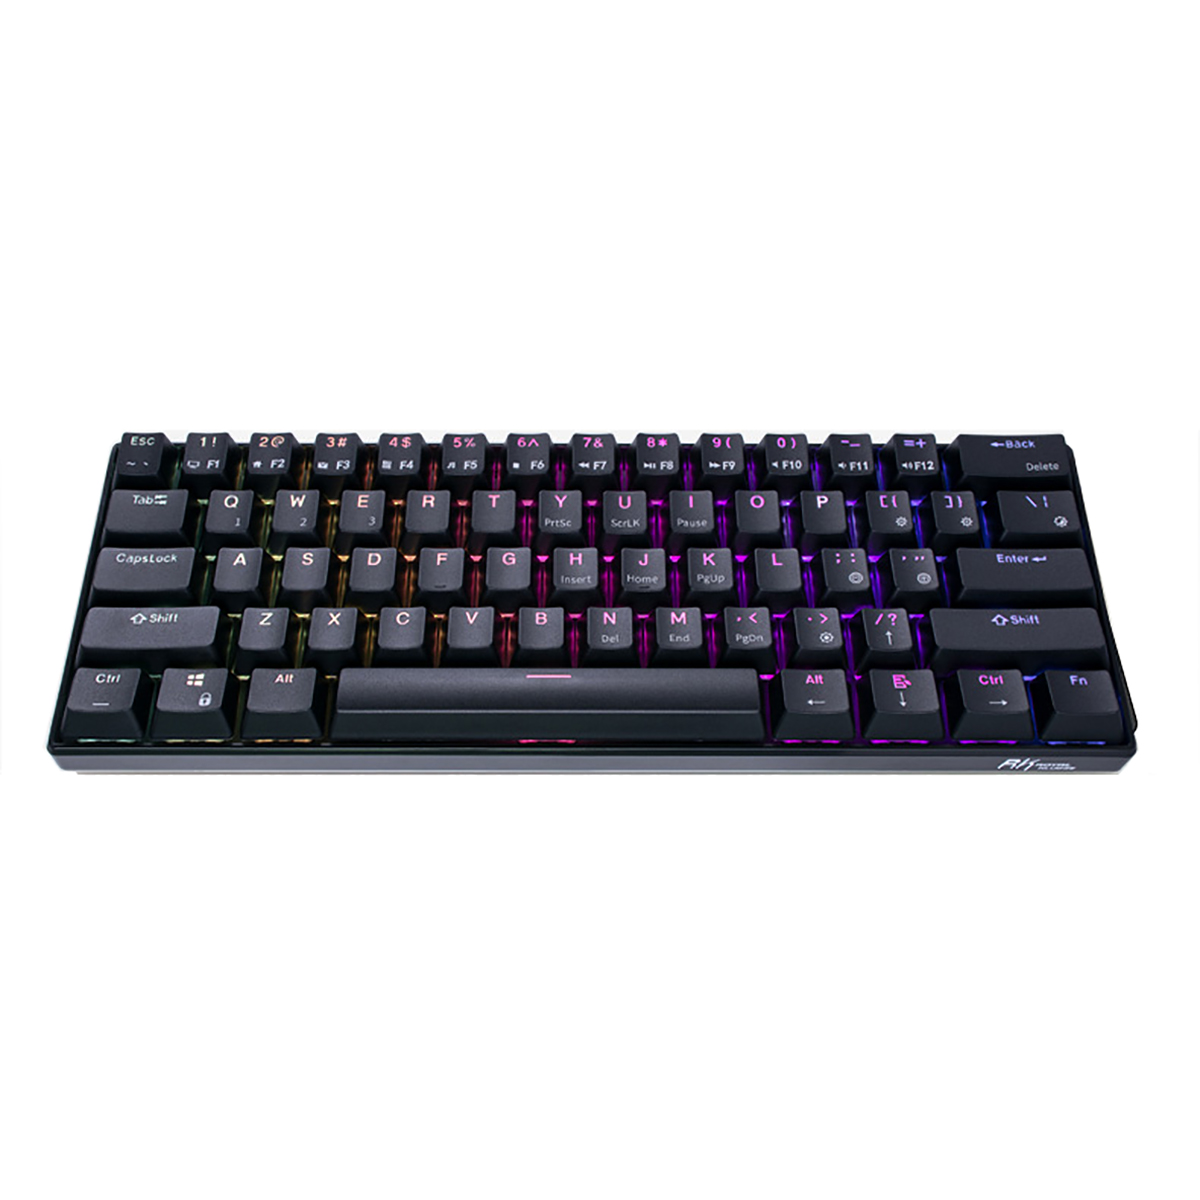 Find Royal Kludge RK61 Triple Mode Mechanical Keyboard 2 4Ghz Wireless/Bluetooth/Wired 61 Keys RGB Hot Swappable Gaming Keyboard With Software For Mac/Win for Sale on Gipsybee.com with cryptocurrencies